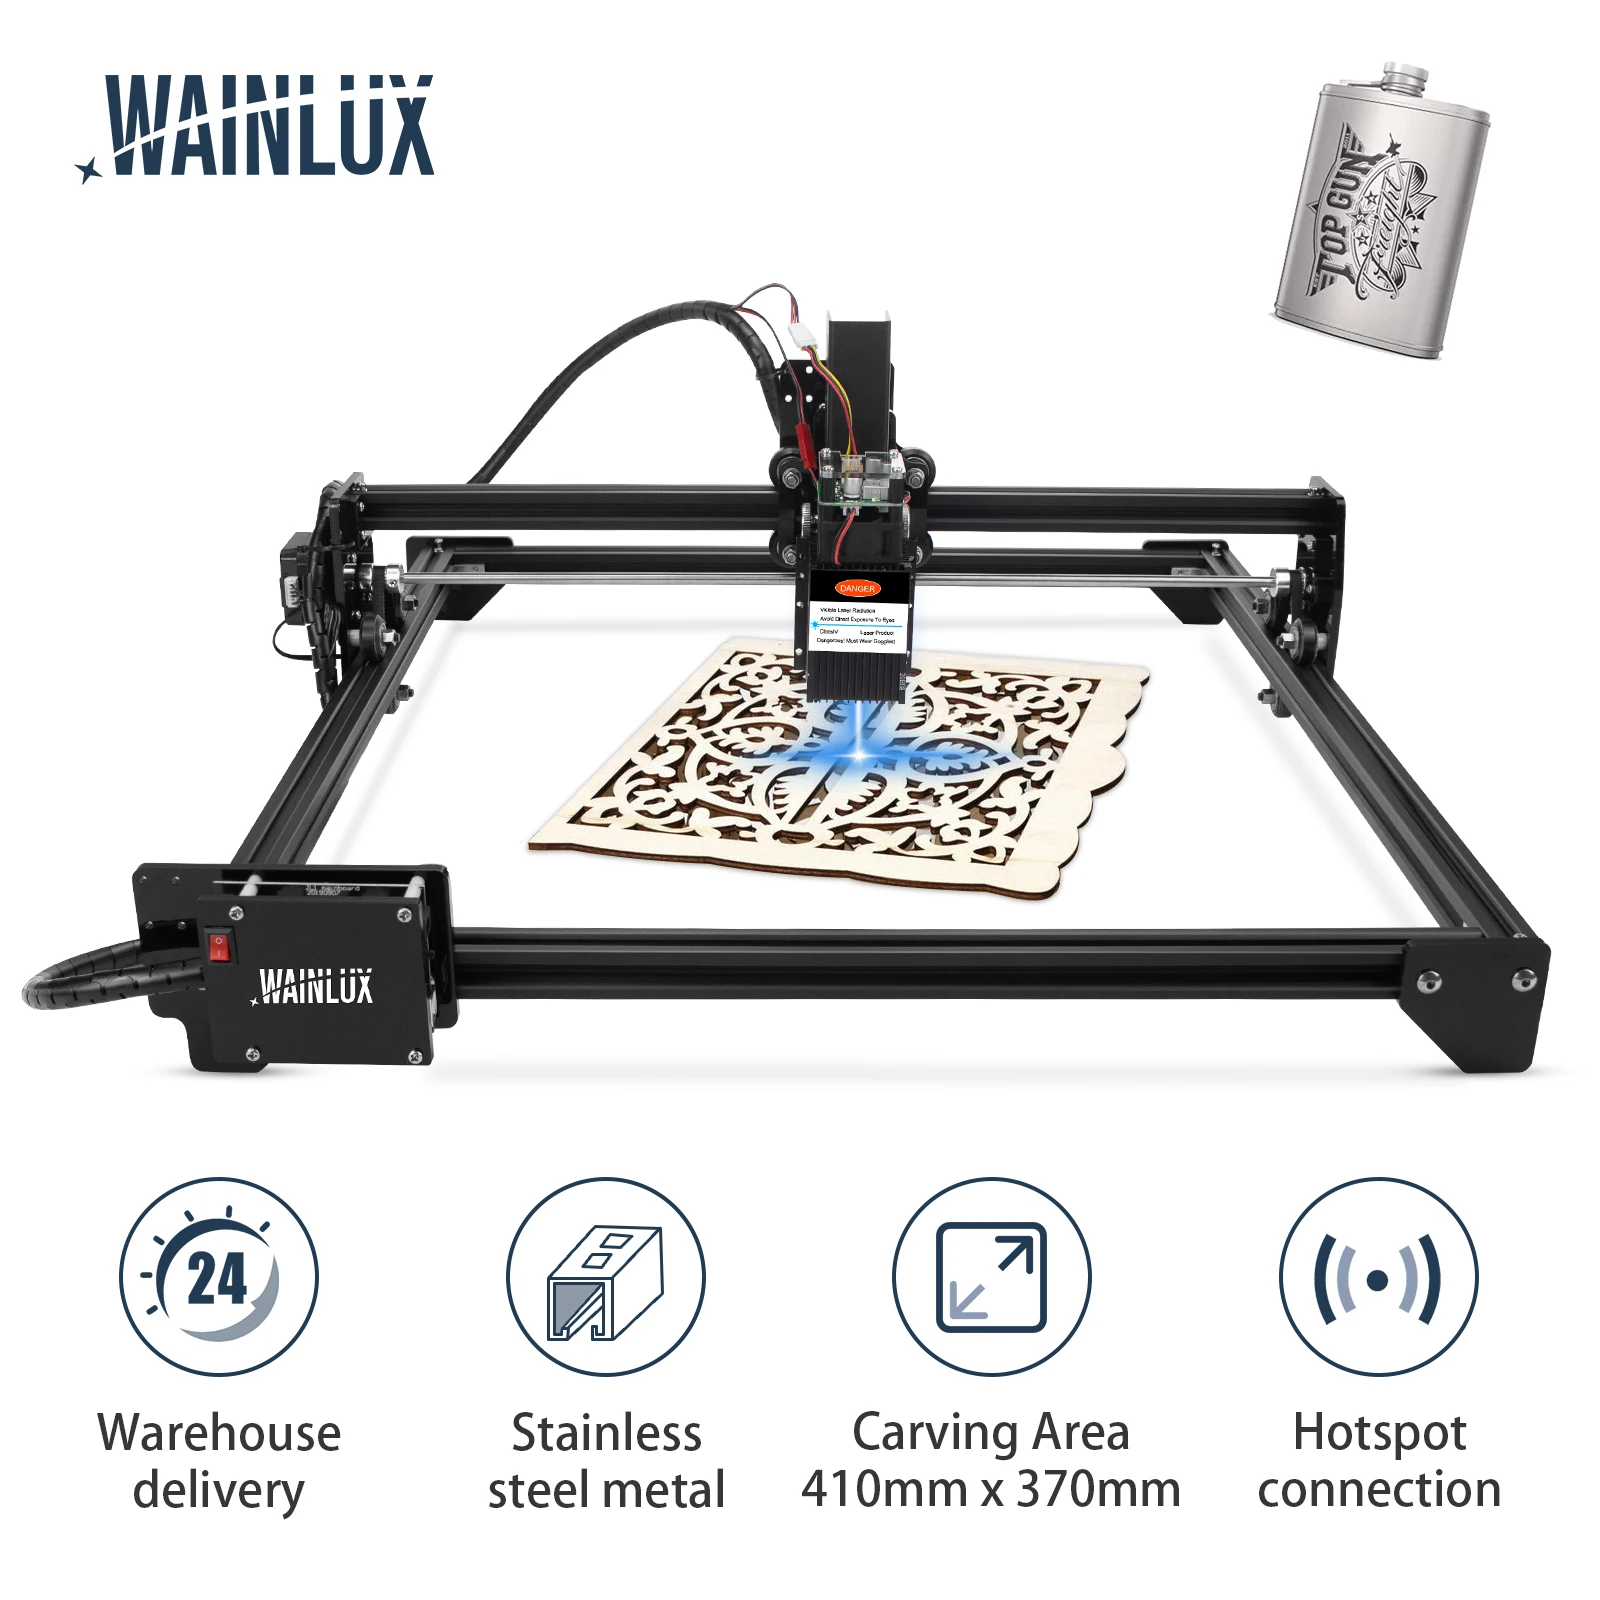 

Wainlux Laser Engraver With 64-Bit Motherboard 7w 20w 30w 40w Carving Area 410 x 370mm CNC Laser Printer Engraving Machine